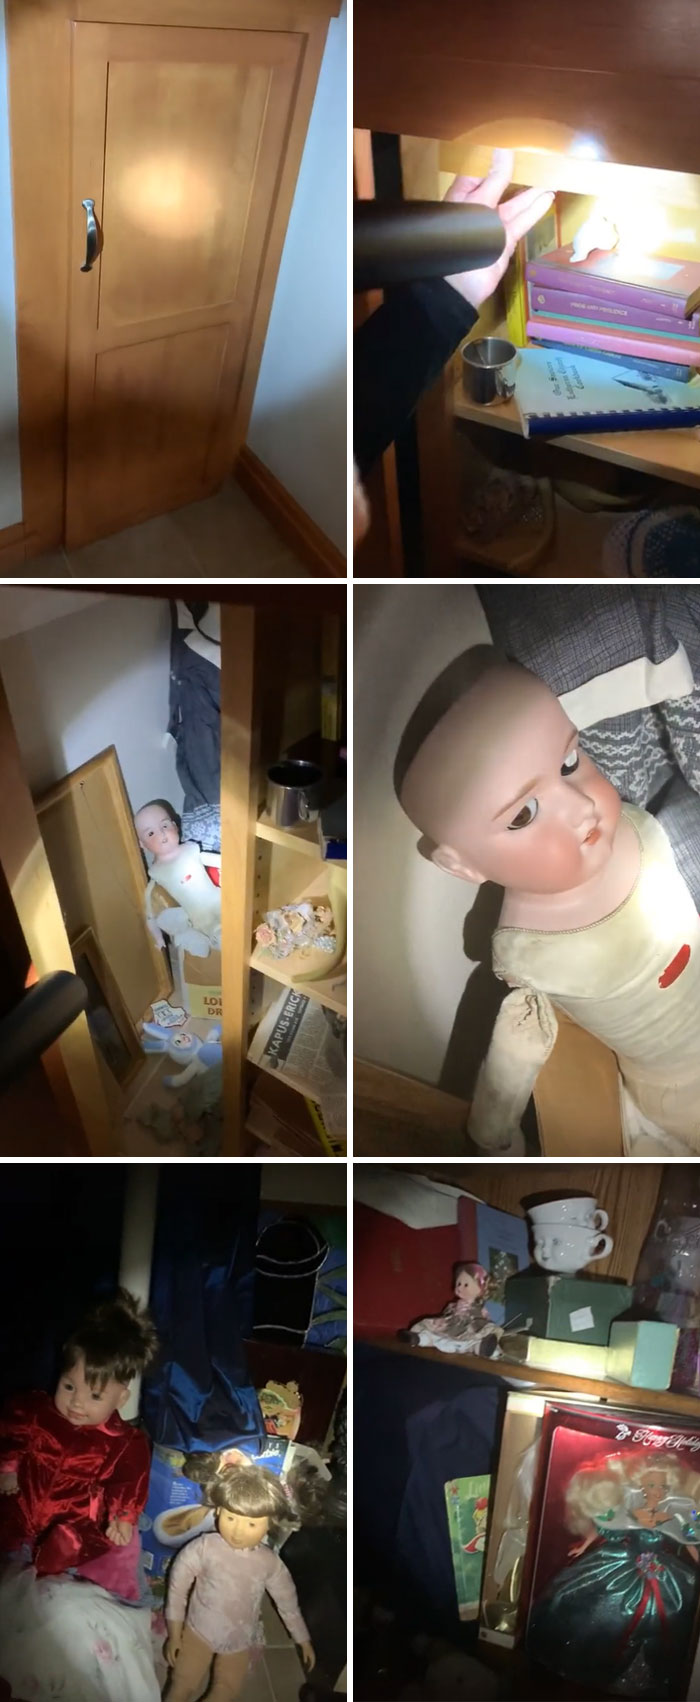 Woman Finds Creepy "Hidden Room" In Her New House